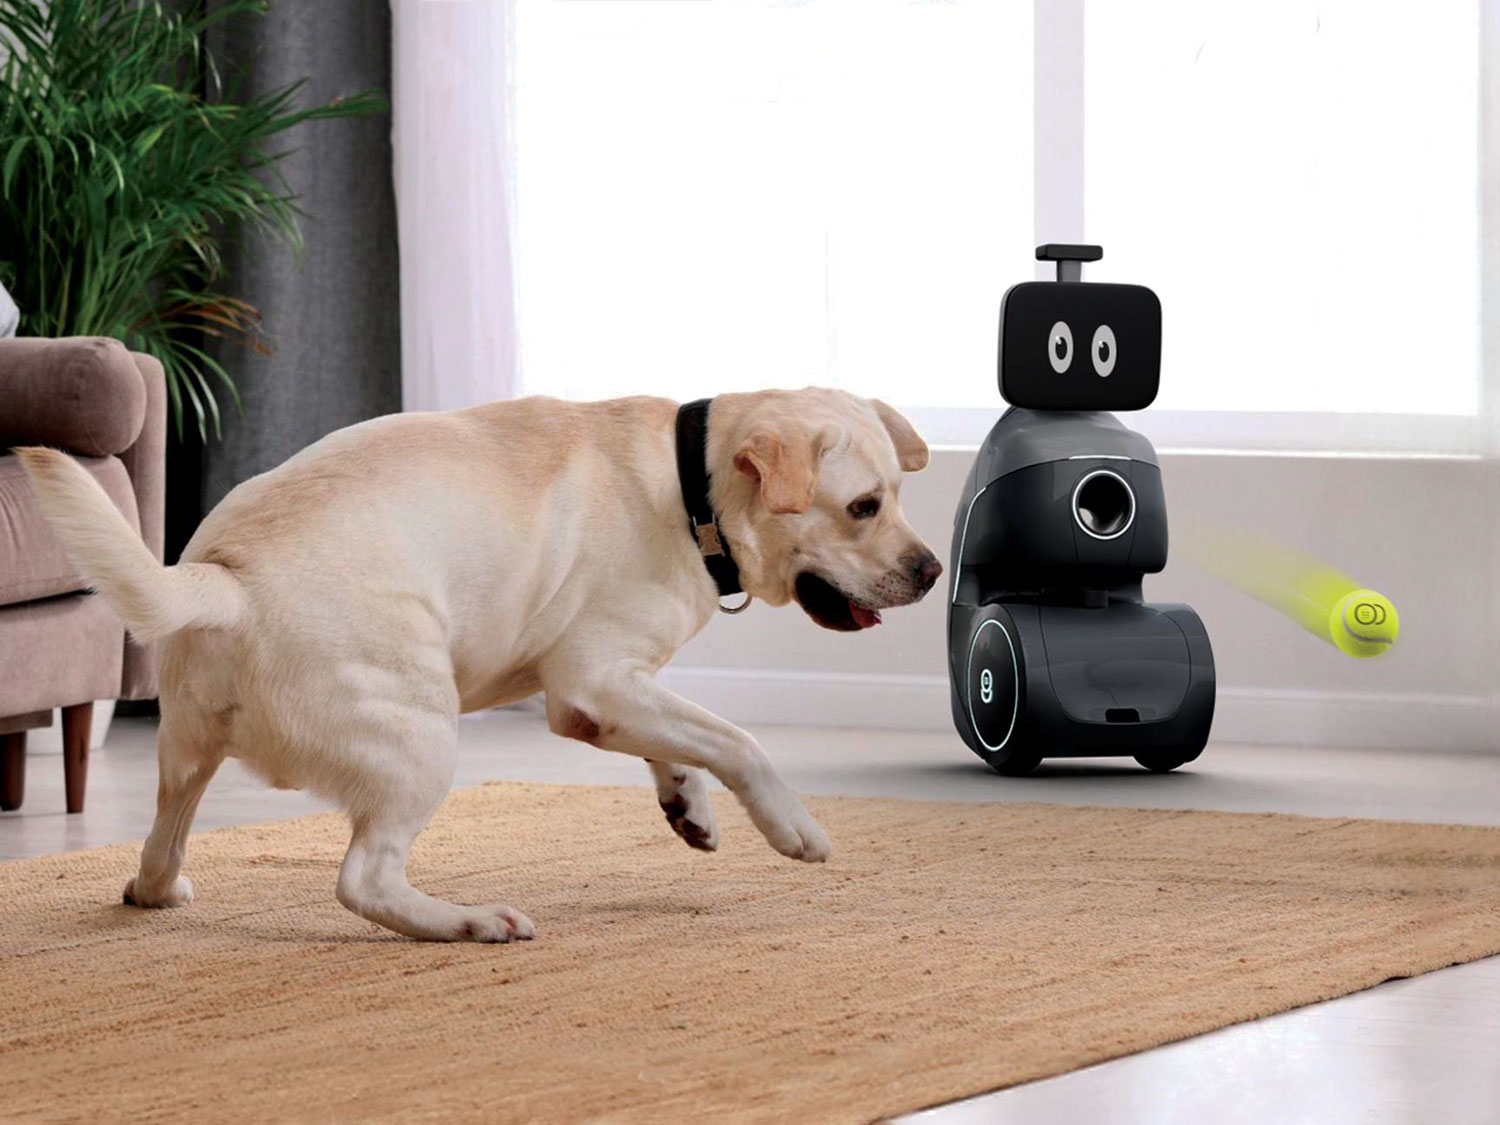 A yellow Labrador chases a ball that is flying away from a small robot in a living room.